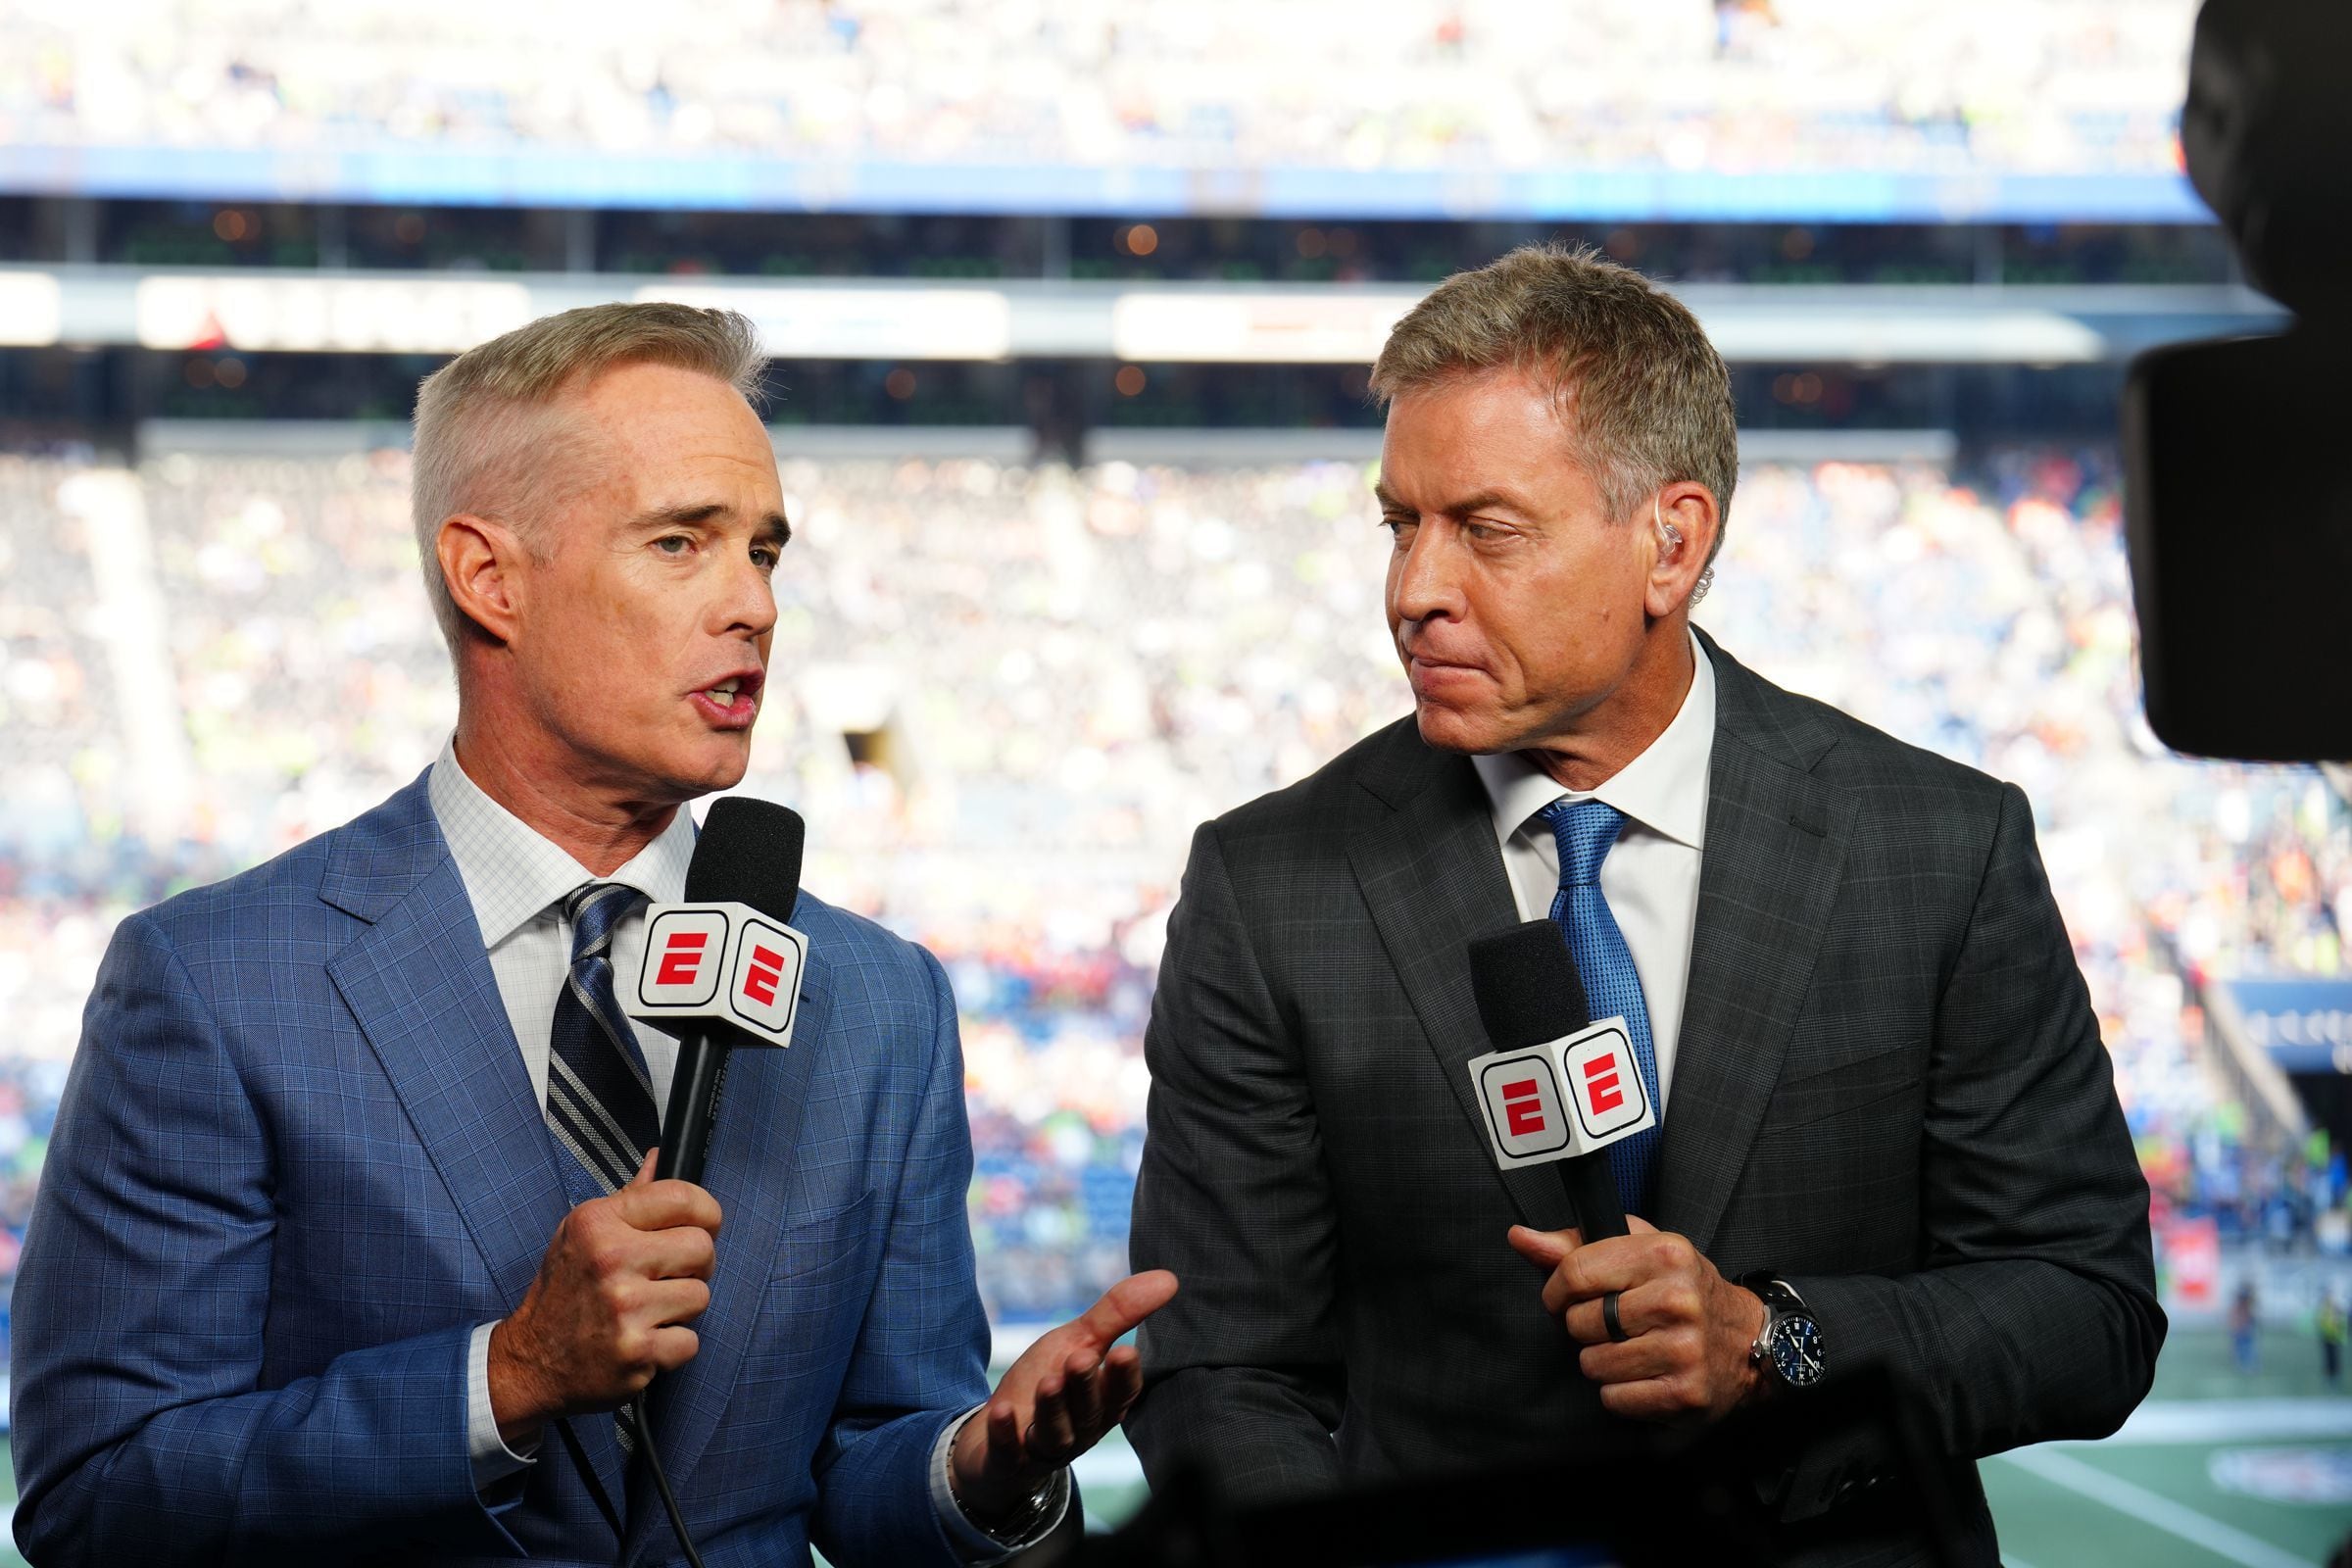 ESPN and ESPN Deportes to Present Monday Night Football from